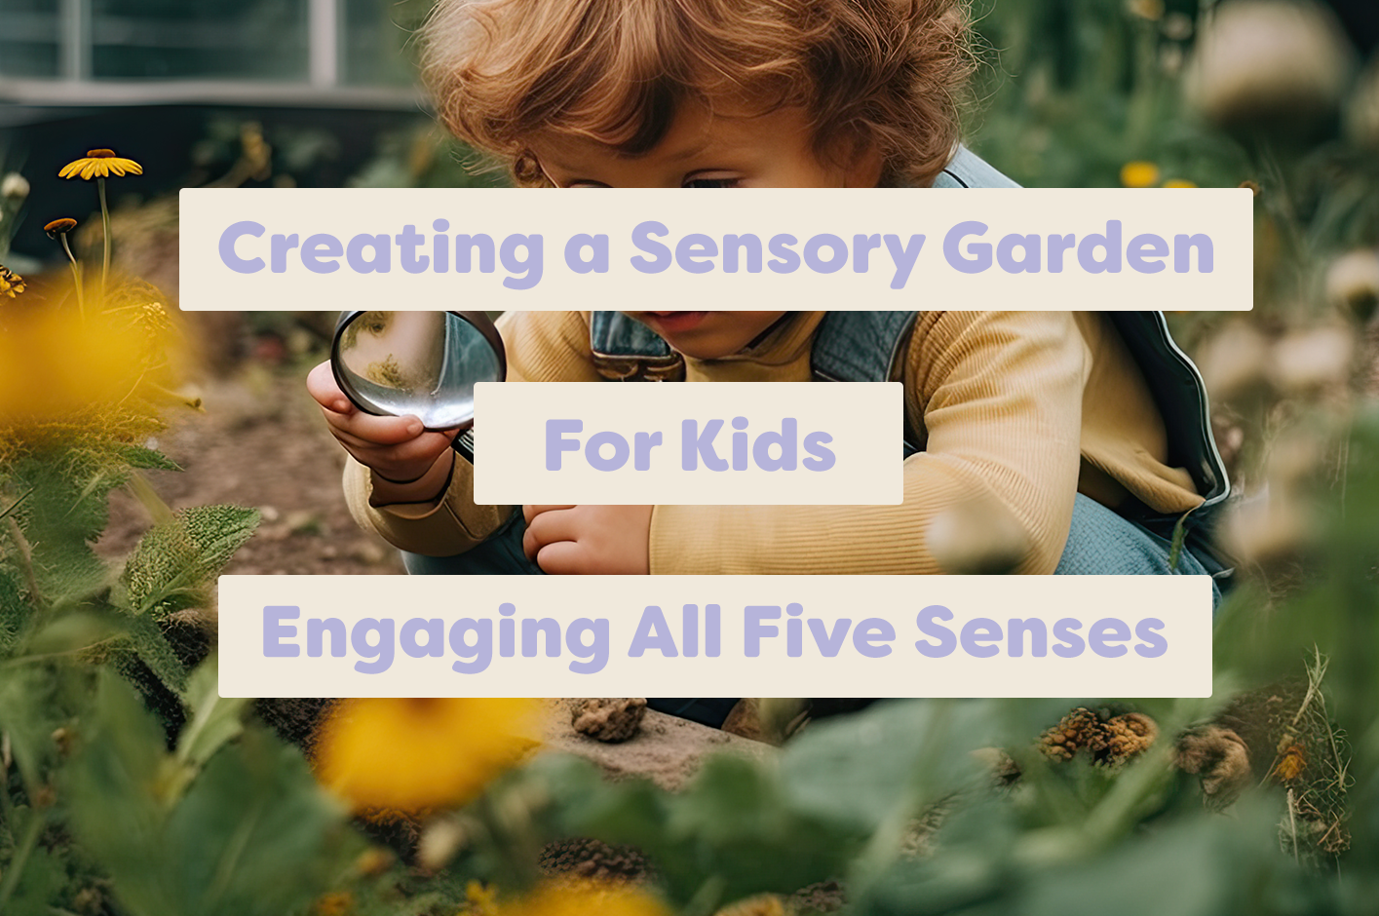 Creating a Sensory Garden for Kids: Engaging All Five Senses